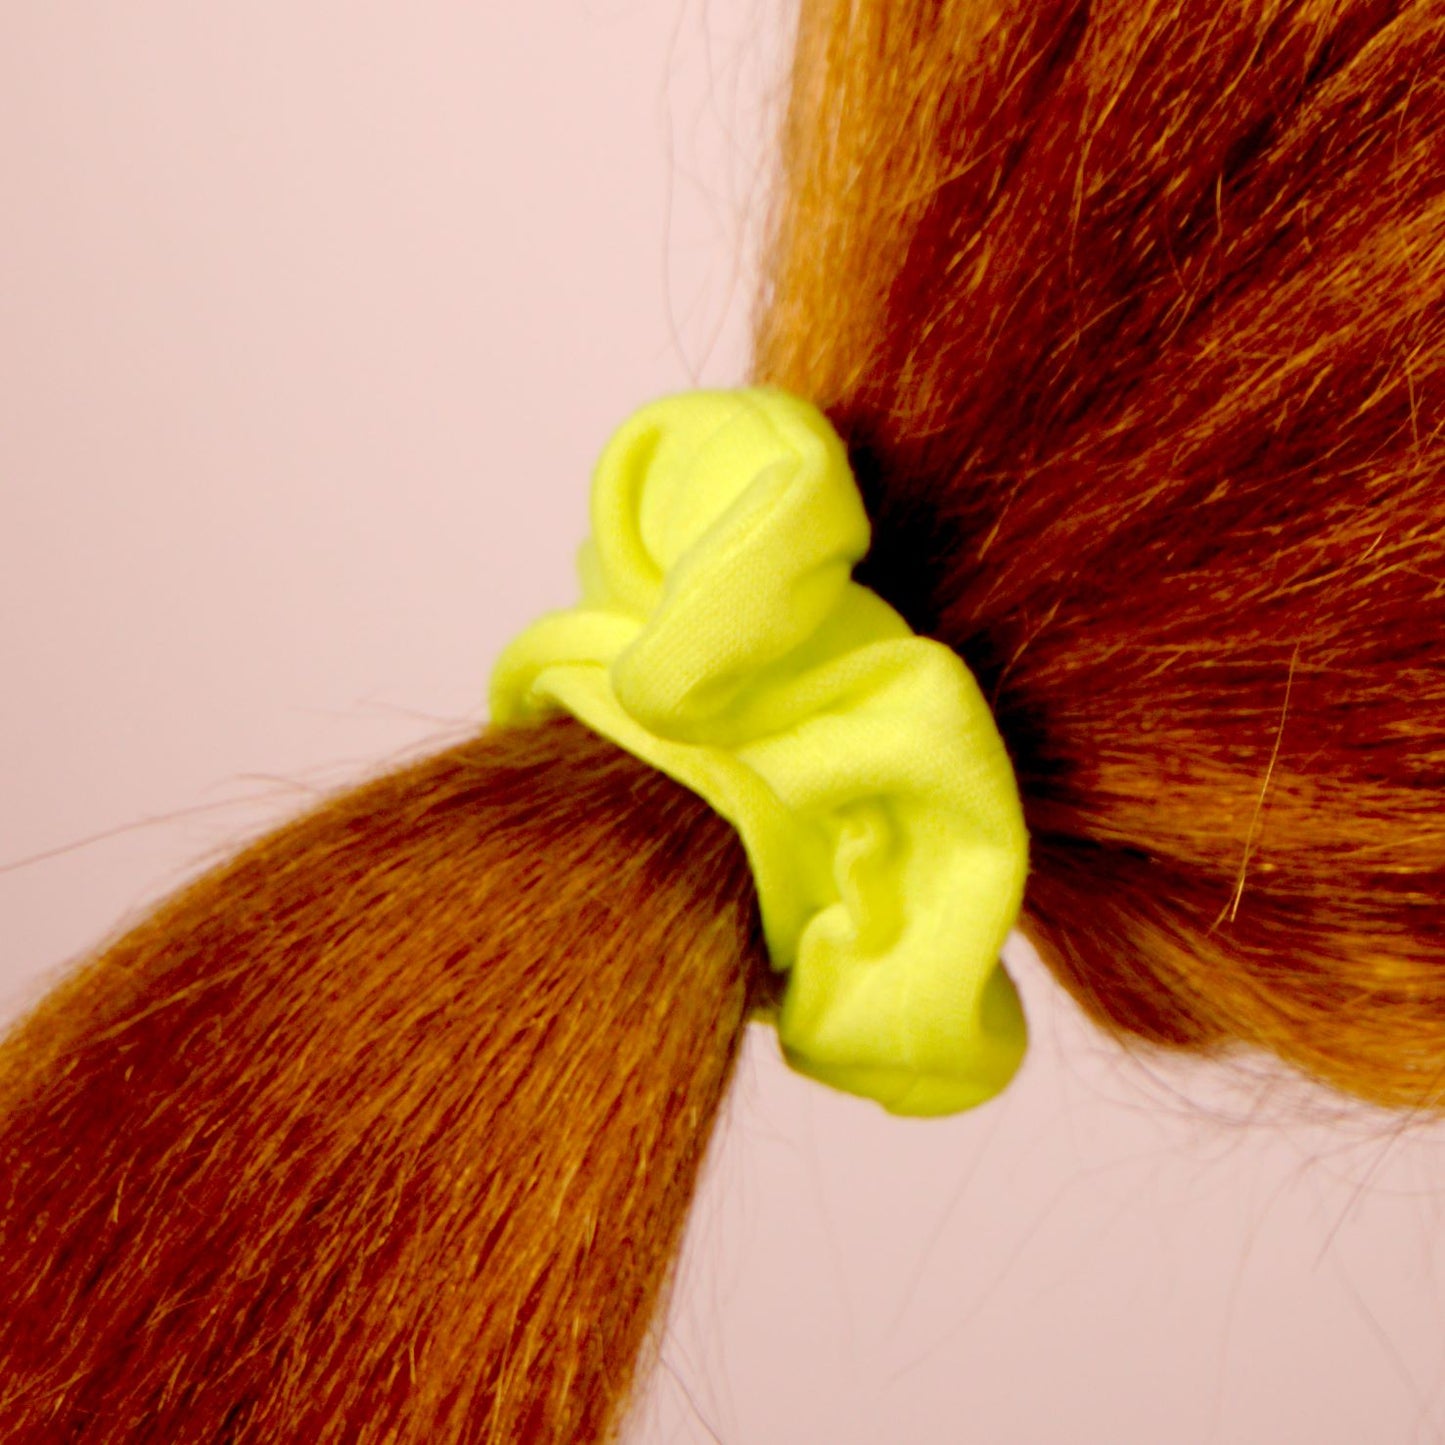 Amelia Beauty, Medium Neon Lime Jersey Scrunchies, 2.5in Diameter, Gentle on Hair, Strong Hold, No Snag, No Dents or Creases. 10 Pack